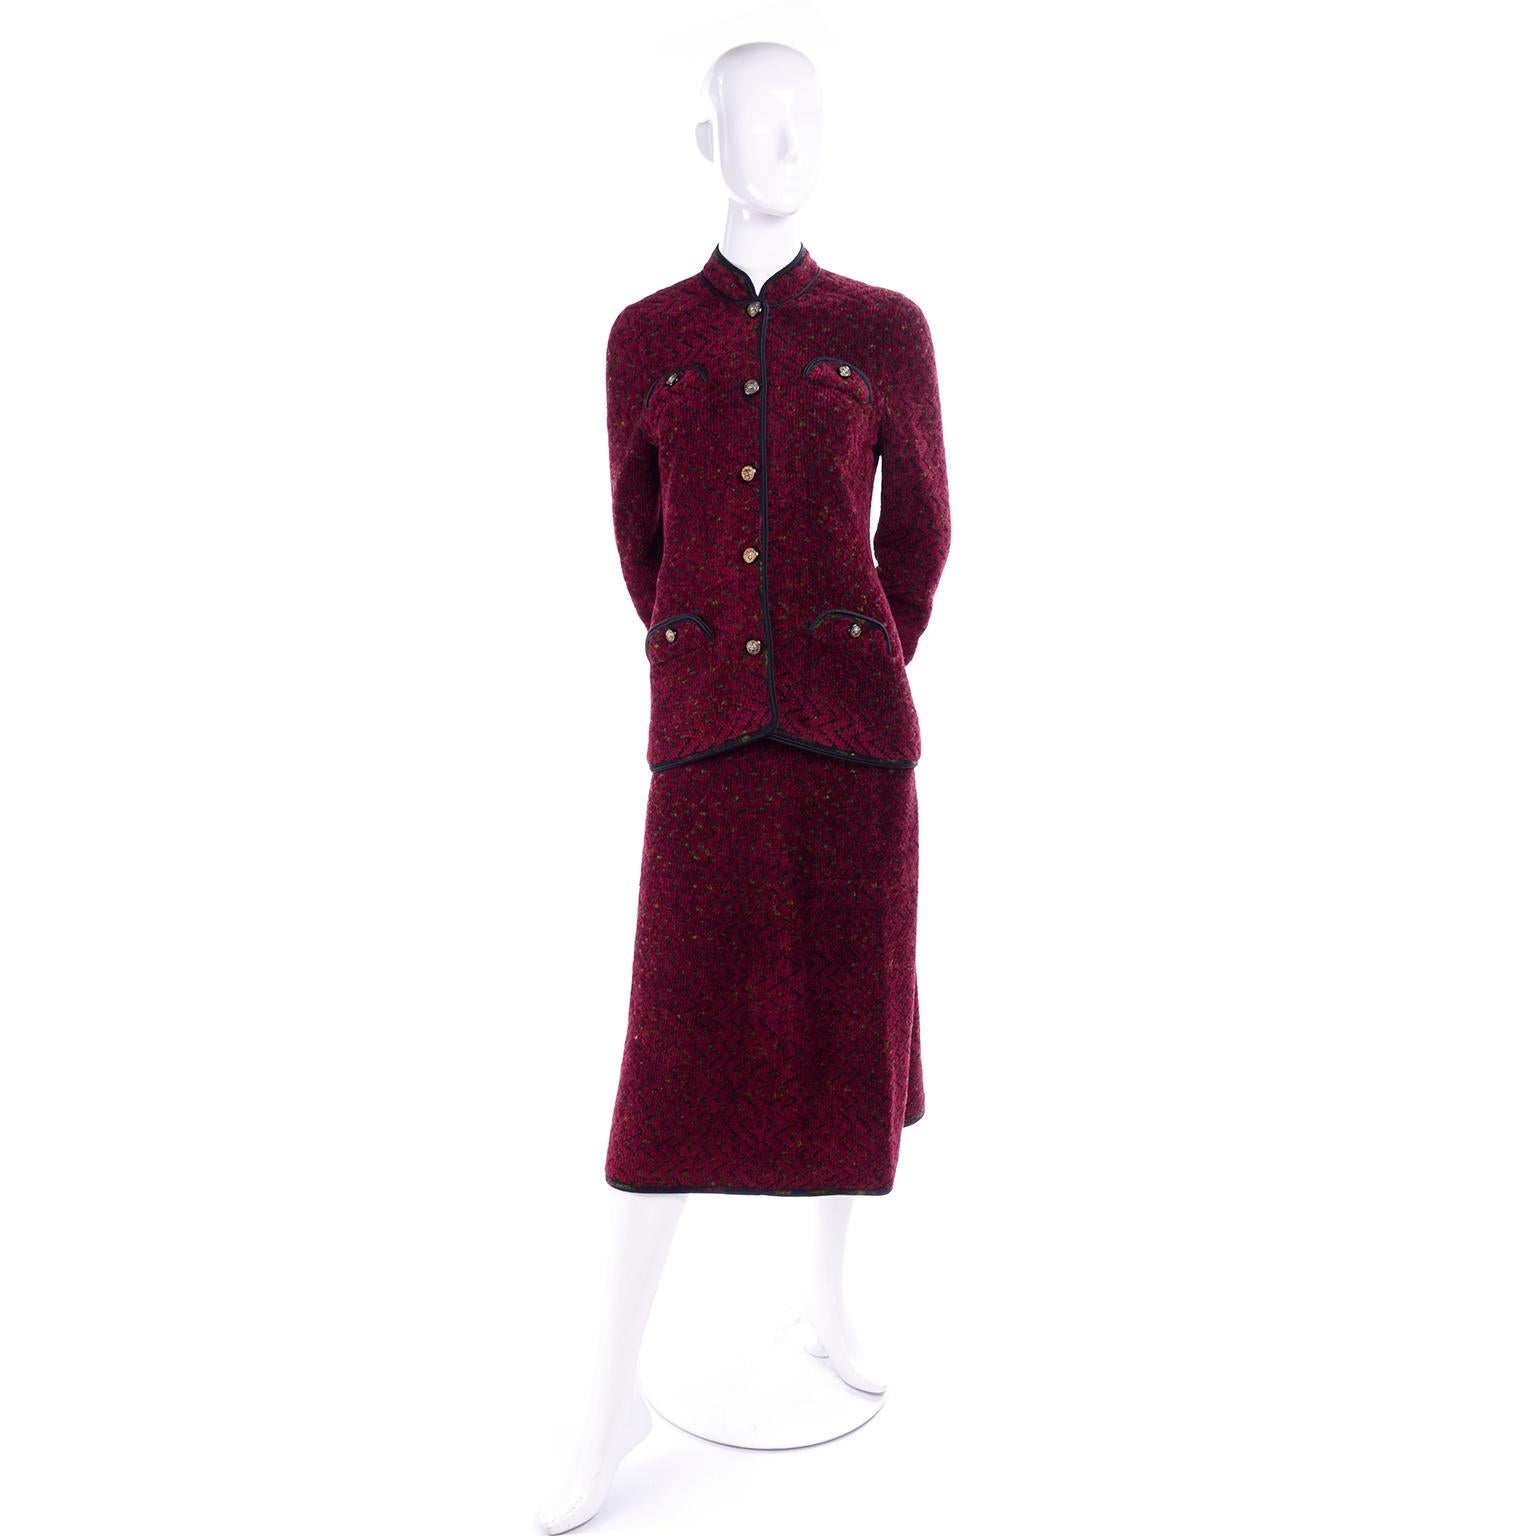 1970s Adolfo Vintage Burgundy Red Knit Skirt Suit W/ Lion Head Buttons For Sale 1